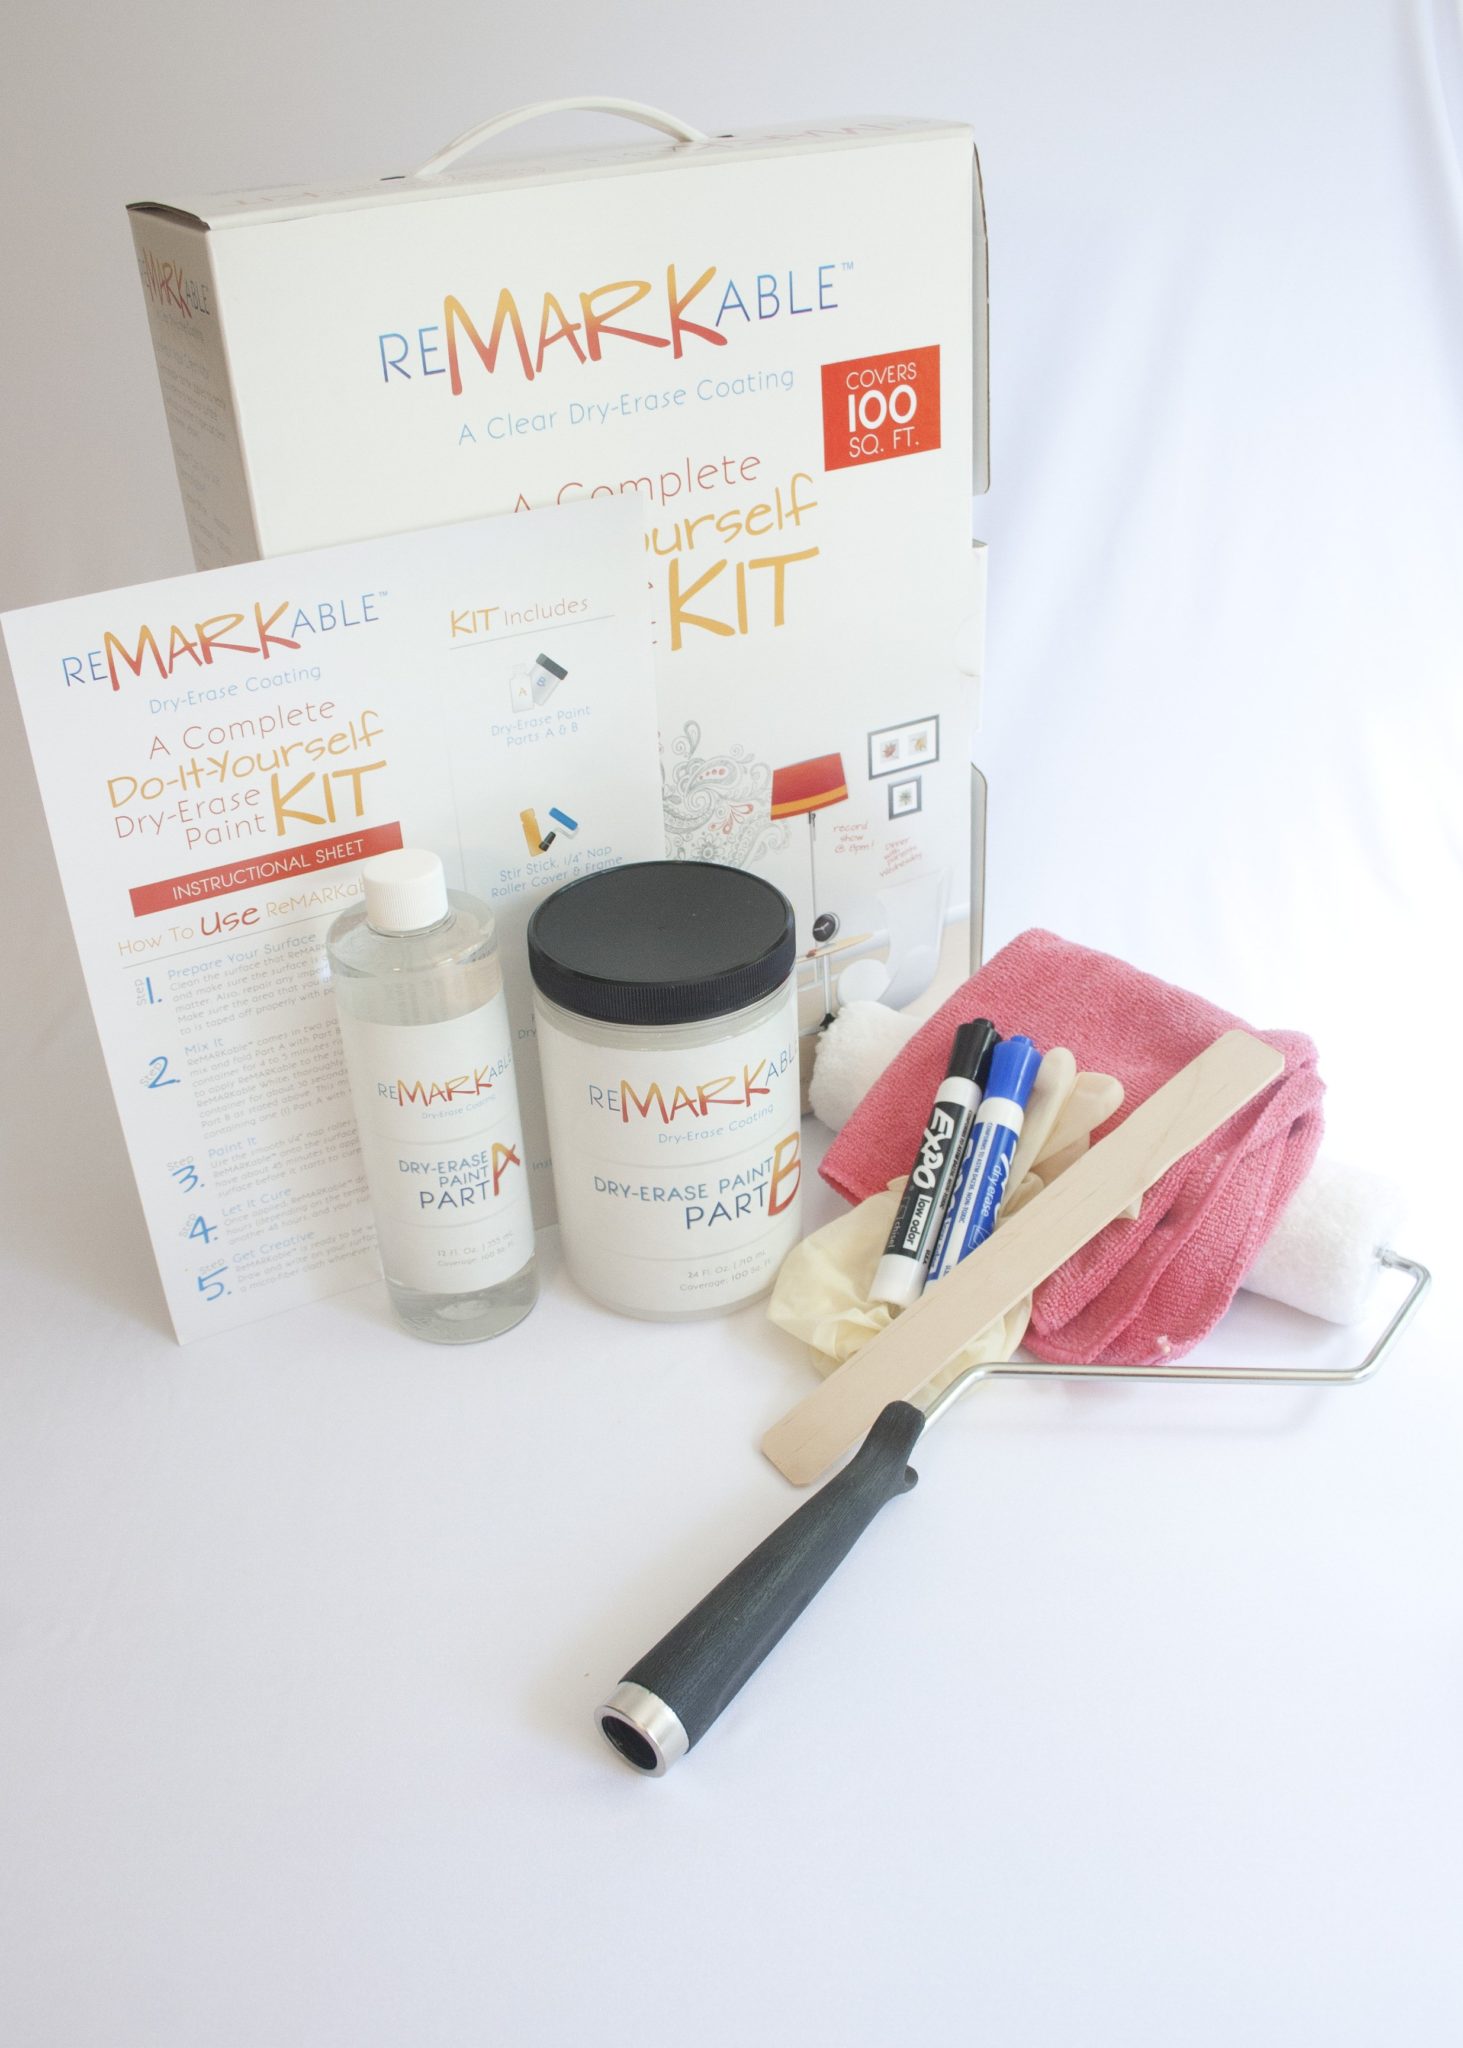 White 100 Square Foot Kit ReMARKable Whiteboard Paint